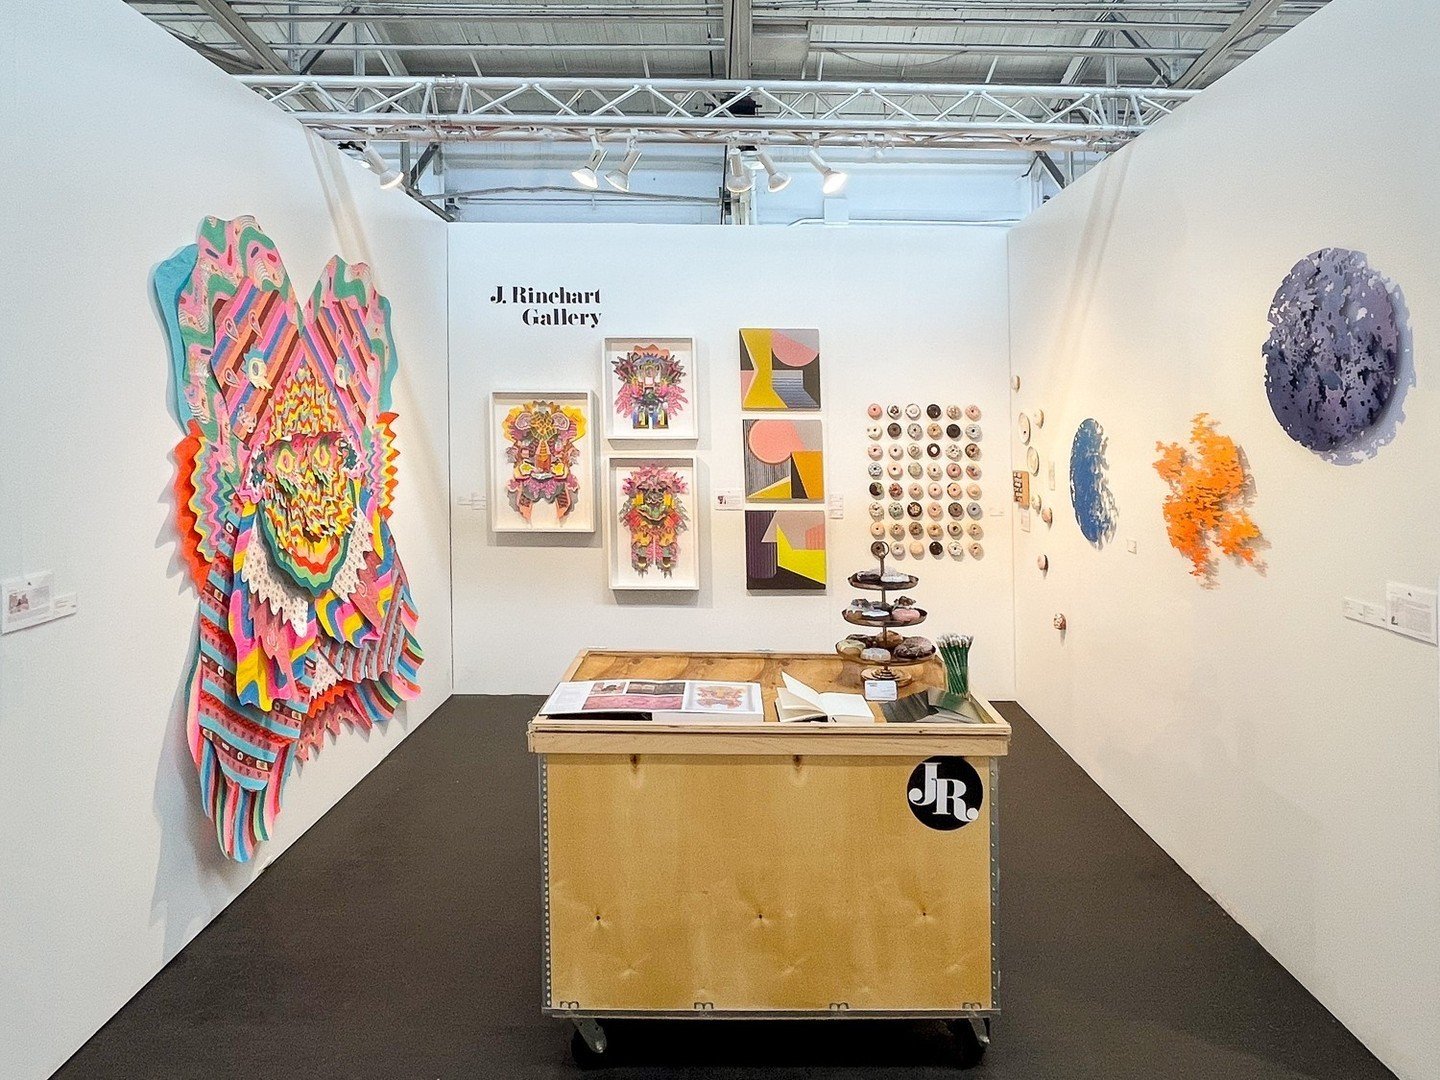 It&rsquo;s a wrap San Francisco! We had such a great time being in the Bay Area and sharing some fantastic Northwest Artists with you!⁠
⁠
We&rsquo;ll see you all for First Thursday, and this summer at Seattle Art Fair!